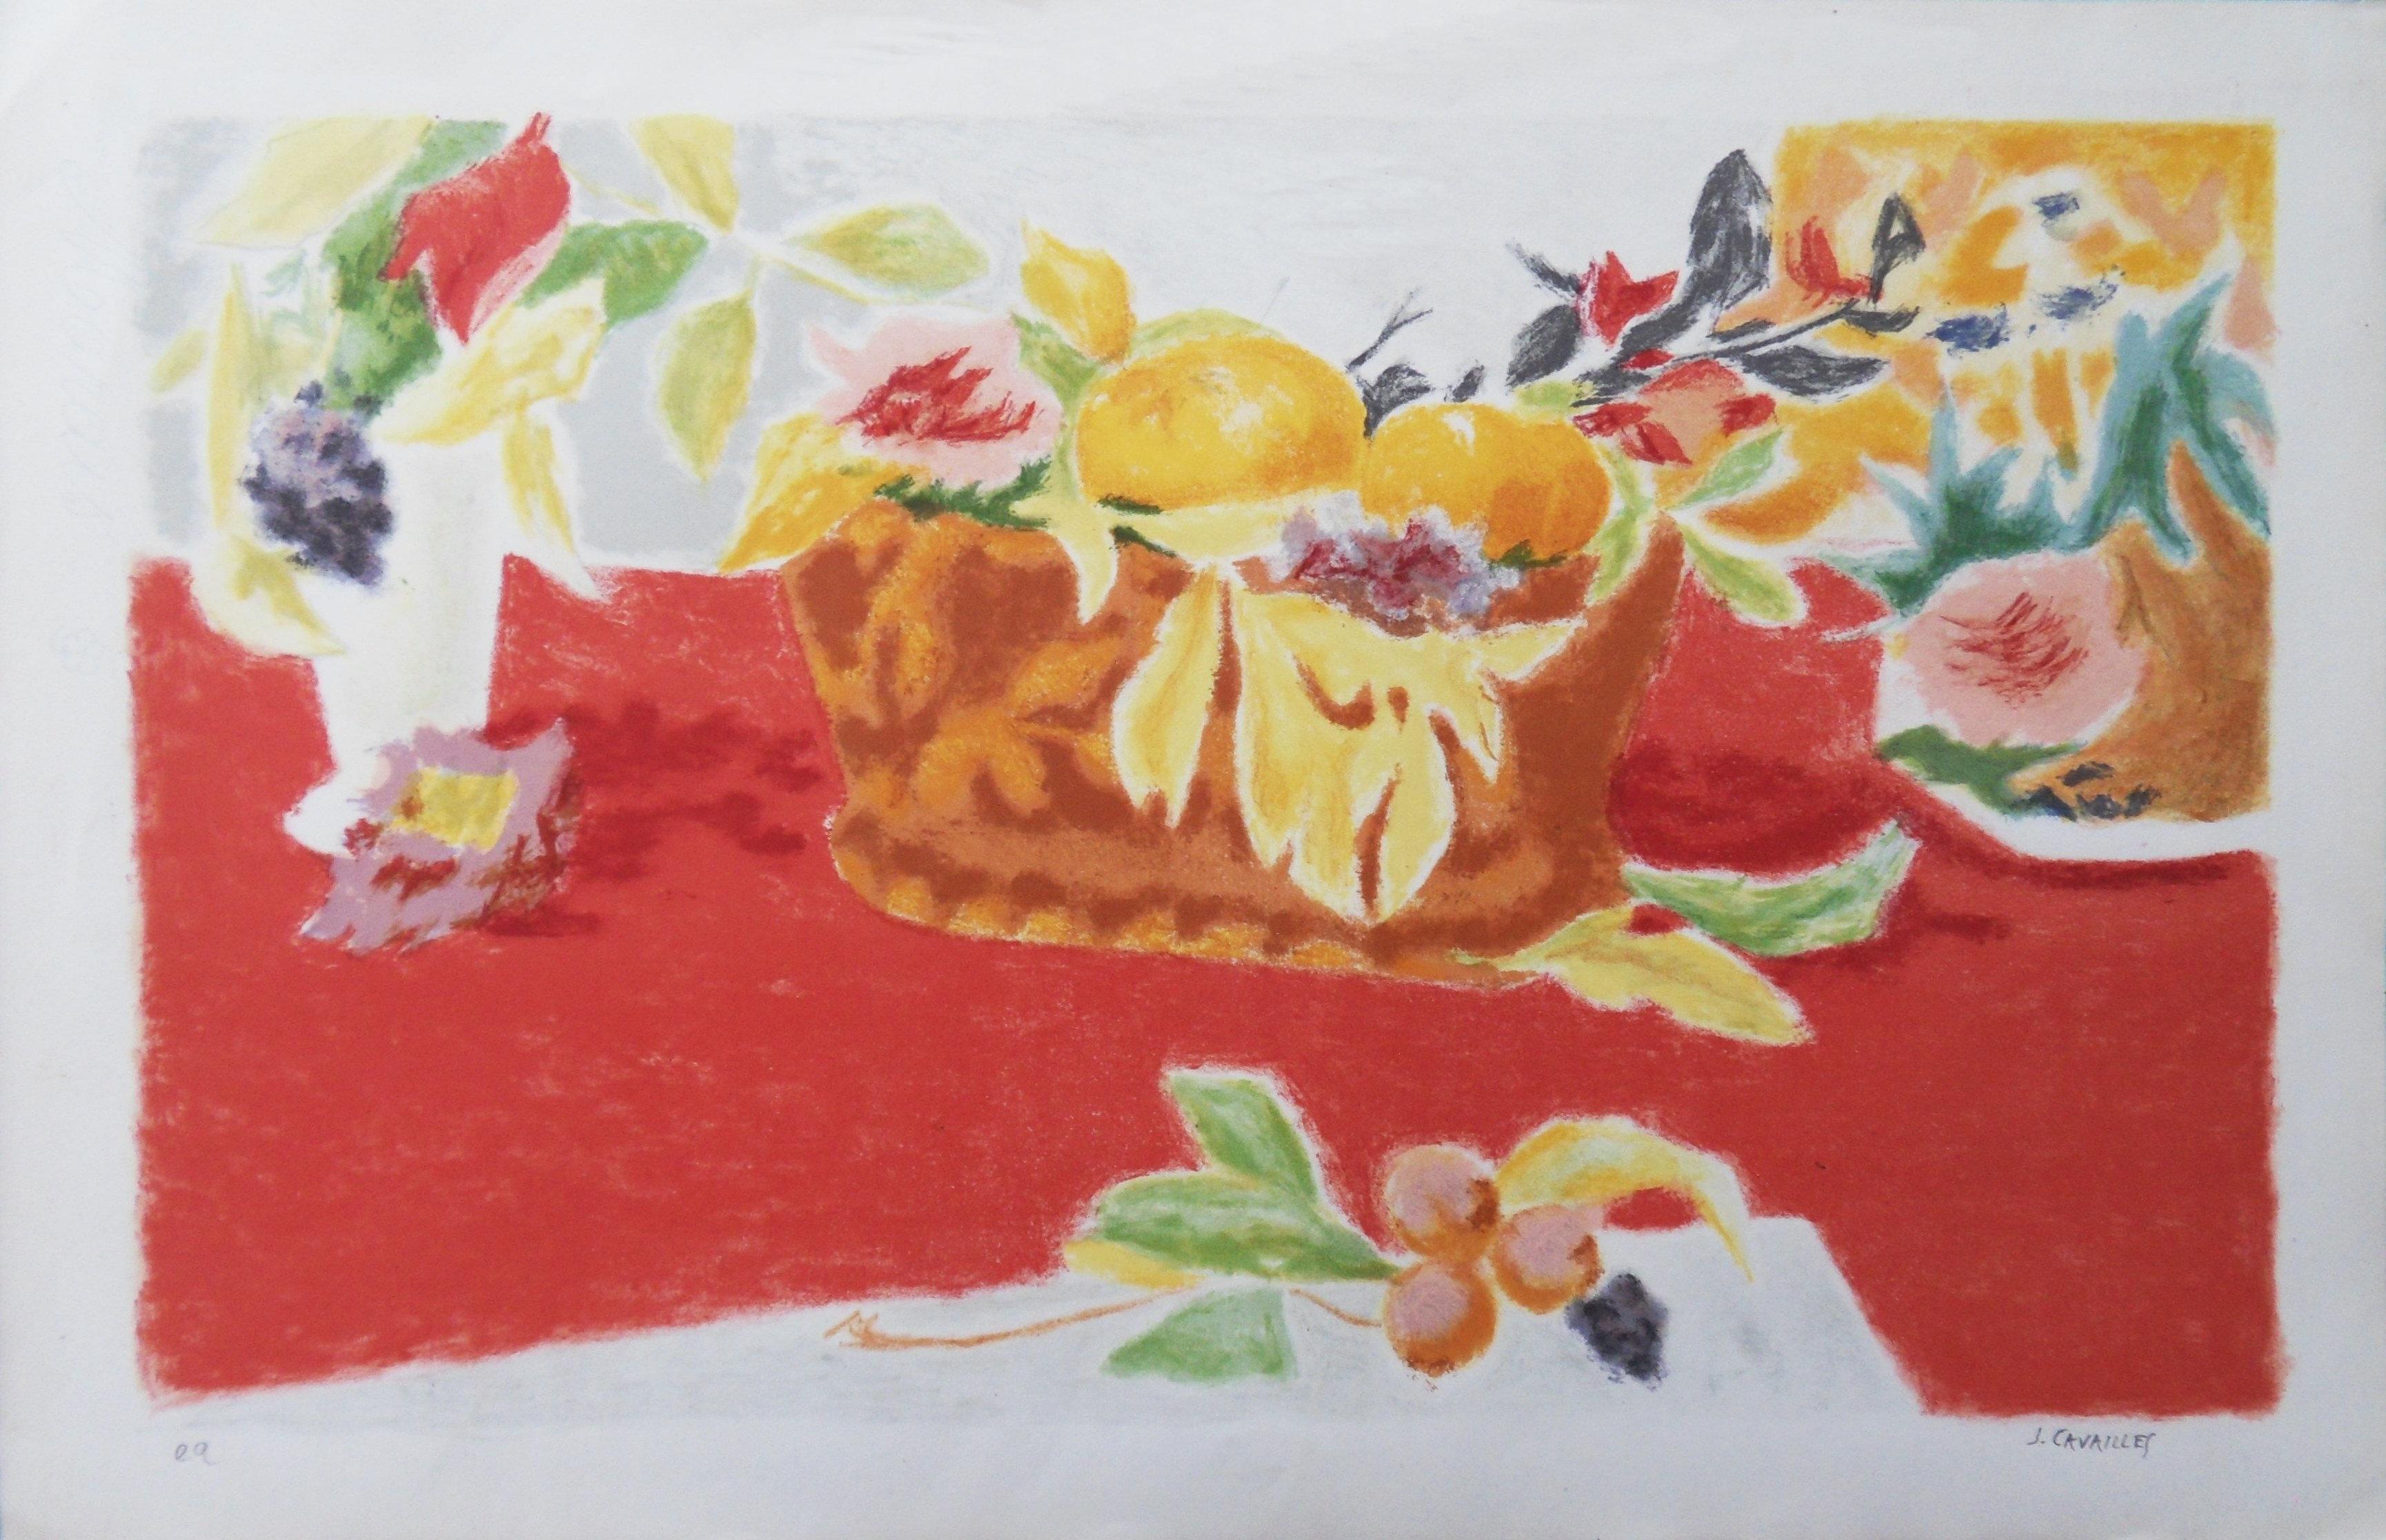 Jules Cavailles Still-Life Print - Fruits and Flowers on Red Background - Original lithograph, Handsigned